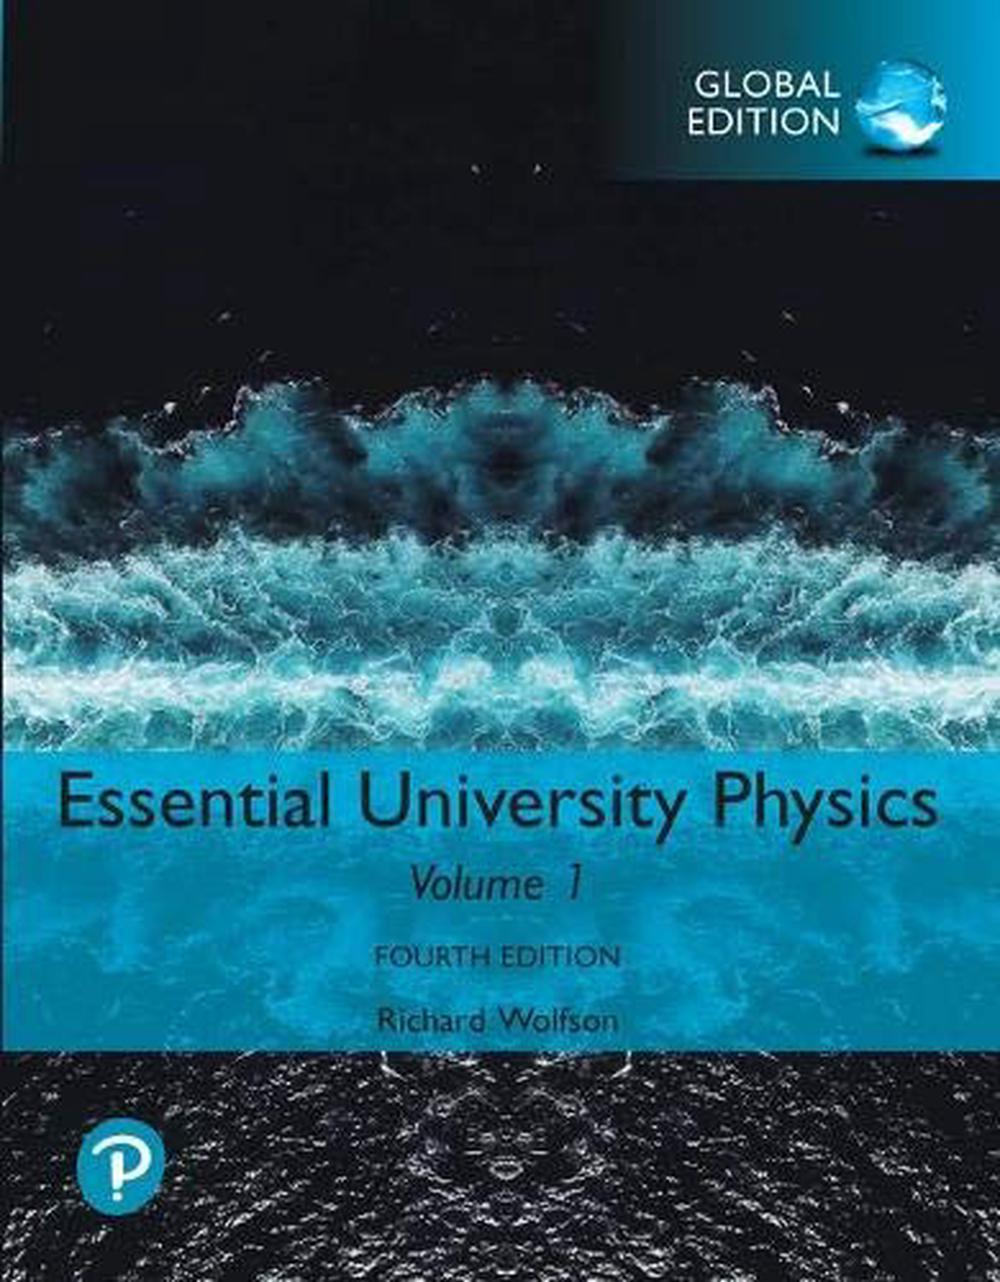 Global　by　Buy　Physics:　4th　The　at　Volume　Edition,　Essential　Nile　Edition　9781292350141　Richard　University　Paperback,　online　1,　Wolfson,